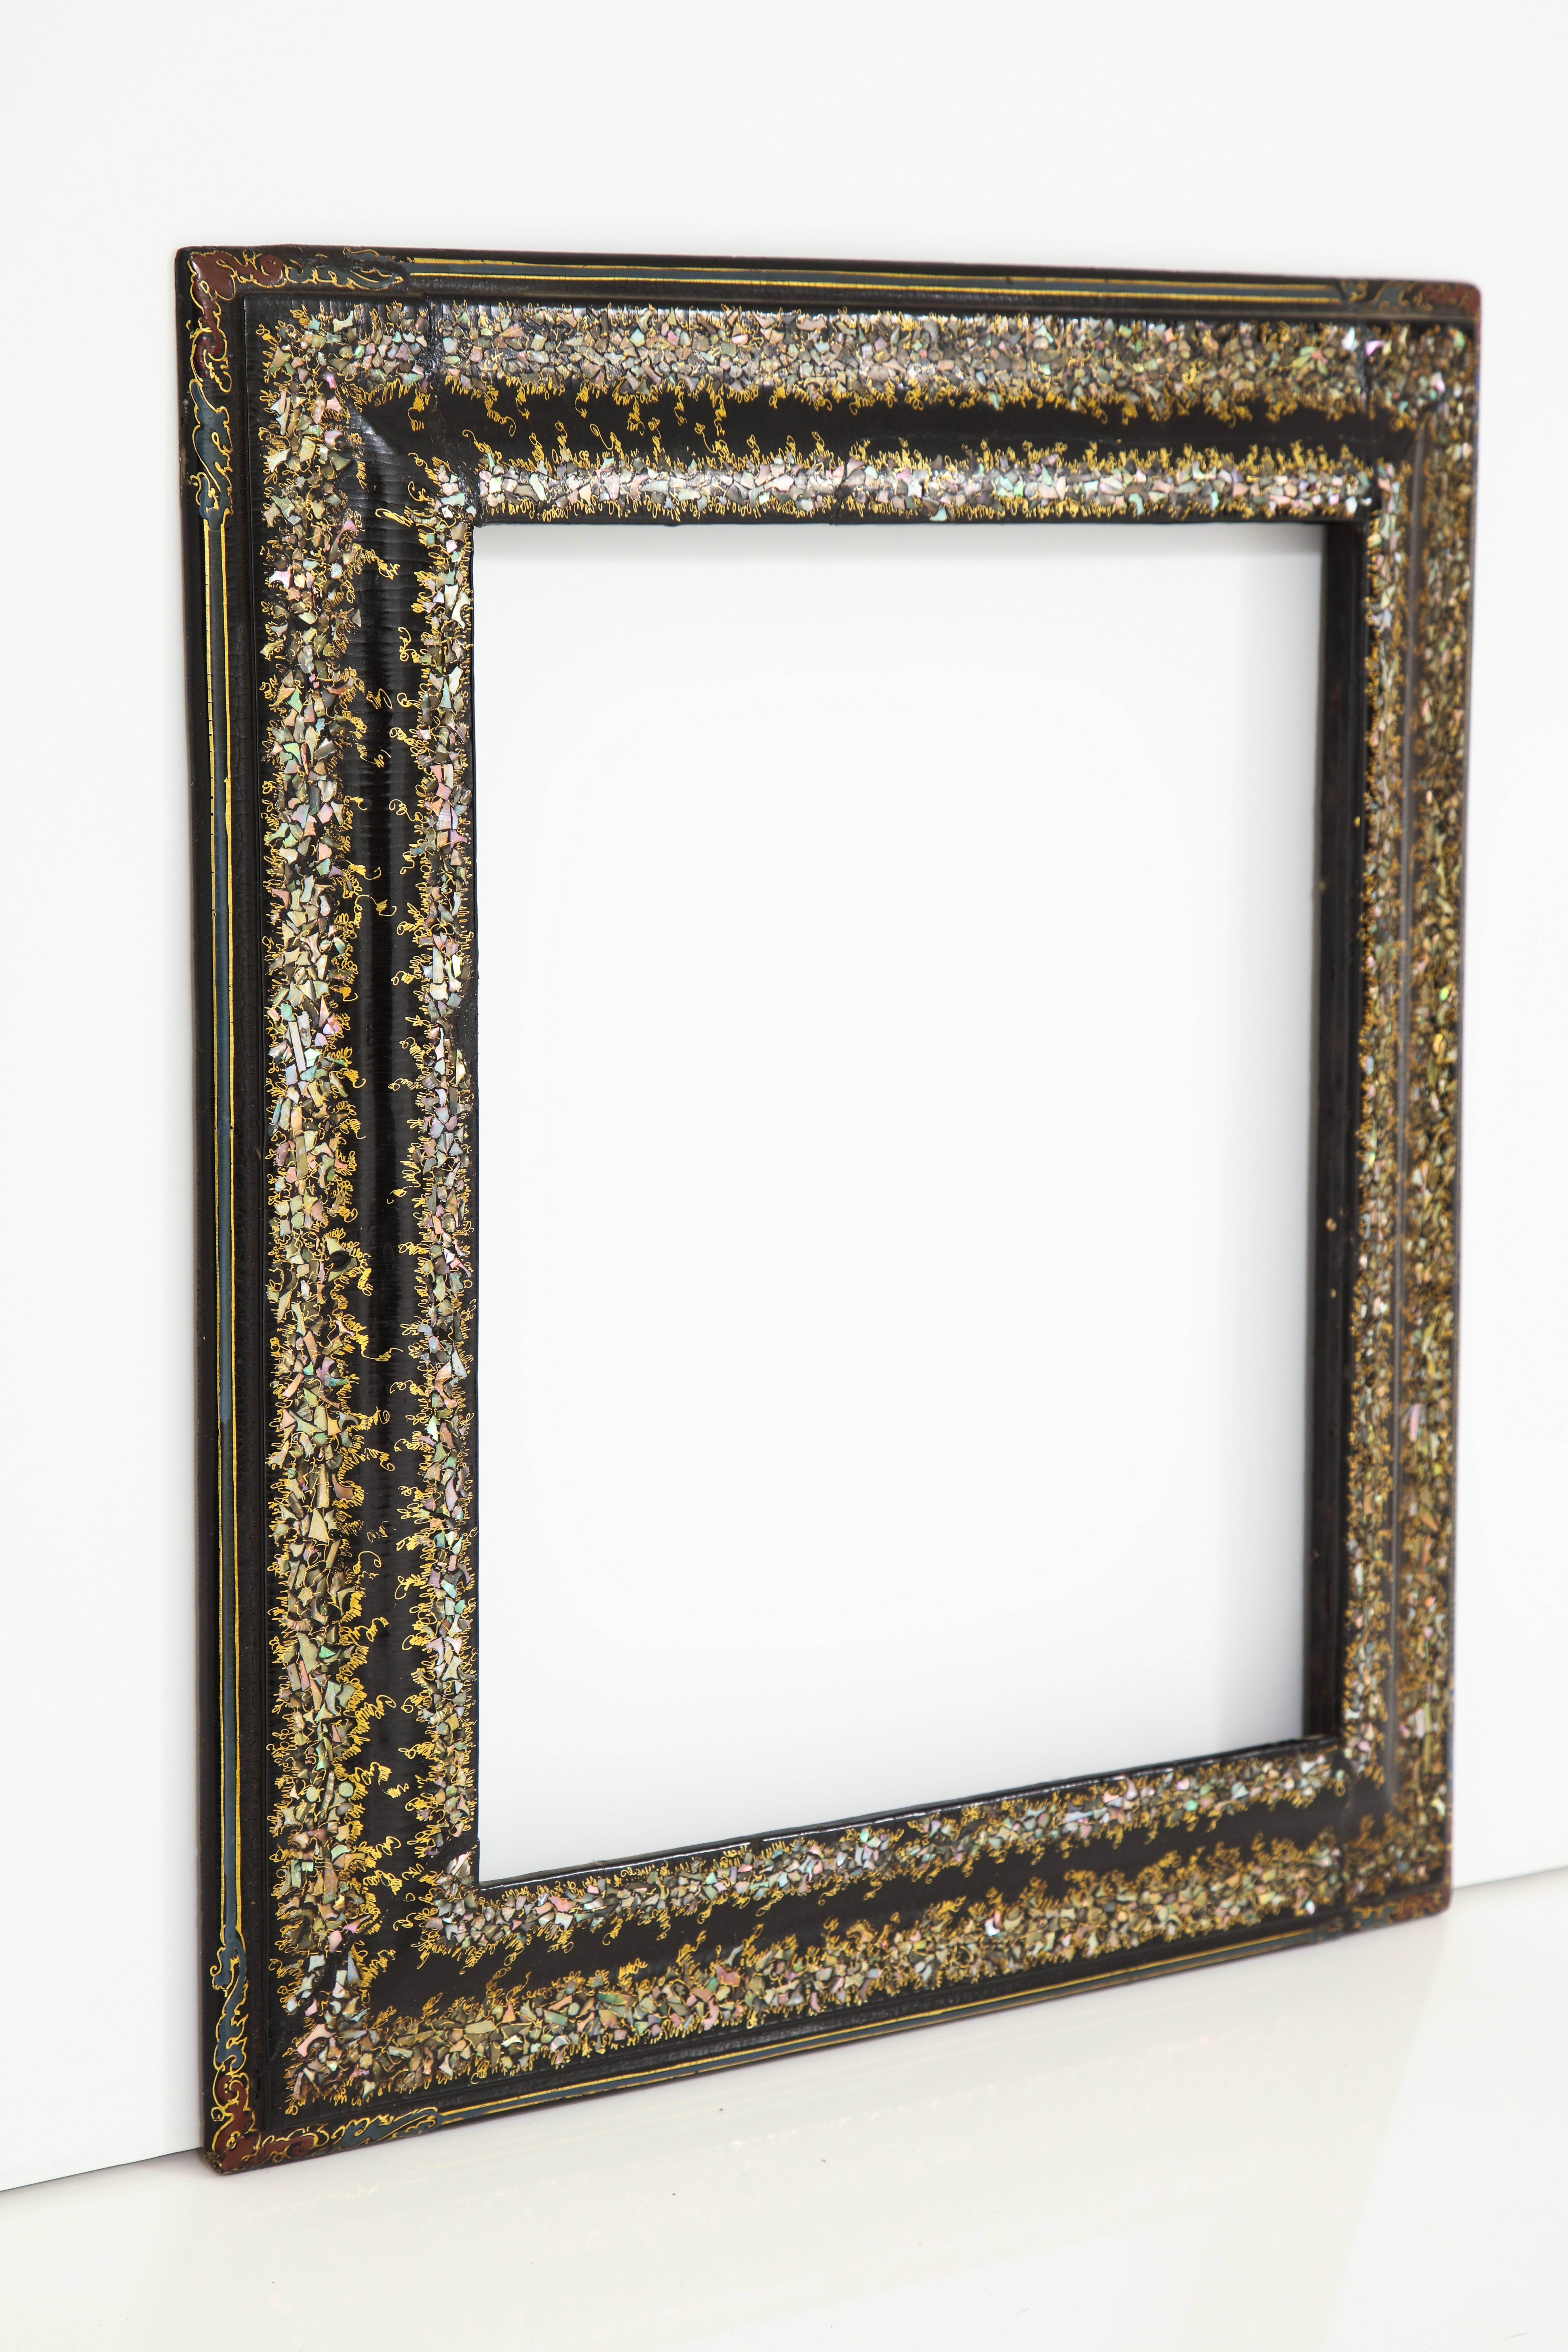 A French Napoleon III (Second Empire) papier mâché black painted, gilded and mother-of-pearl inlaid frame,
France, circa 1880
Size: 17 1/2" high x 16" wide x 1 1/2" deep.
    